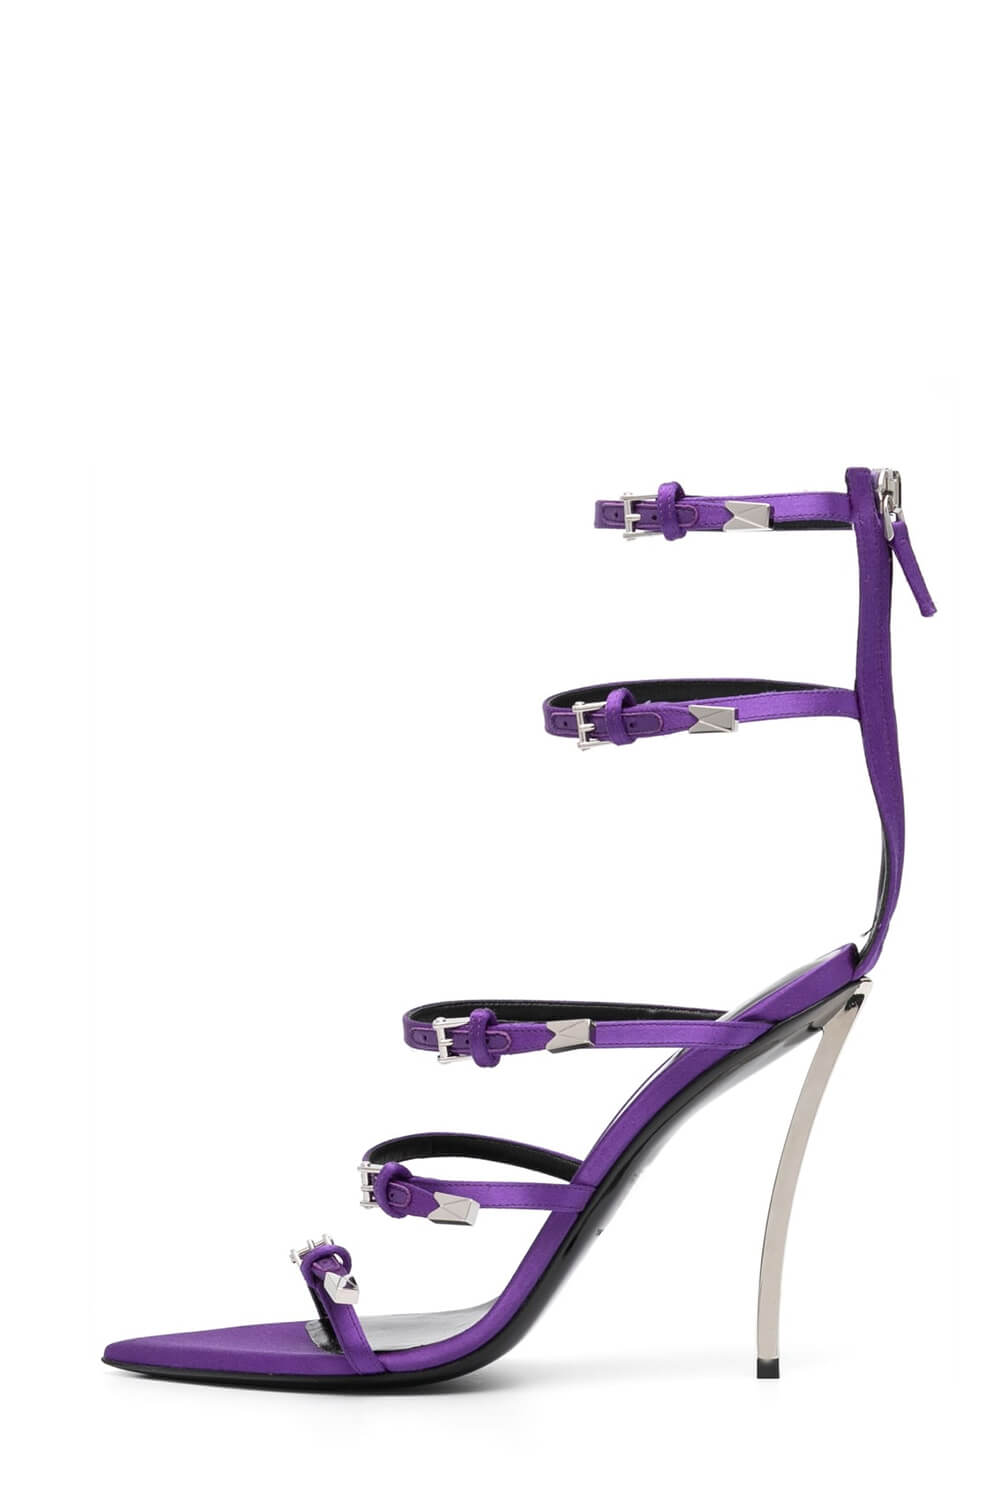 Strappy Buckled Satin Pointed Toe Stiletto Heeled Sandals - Purple